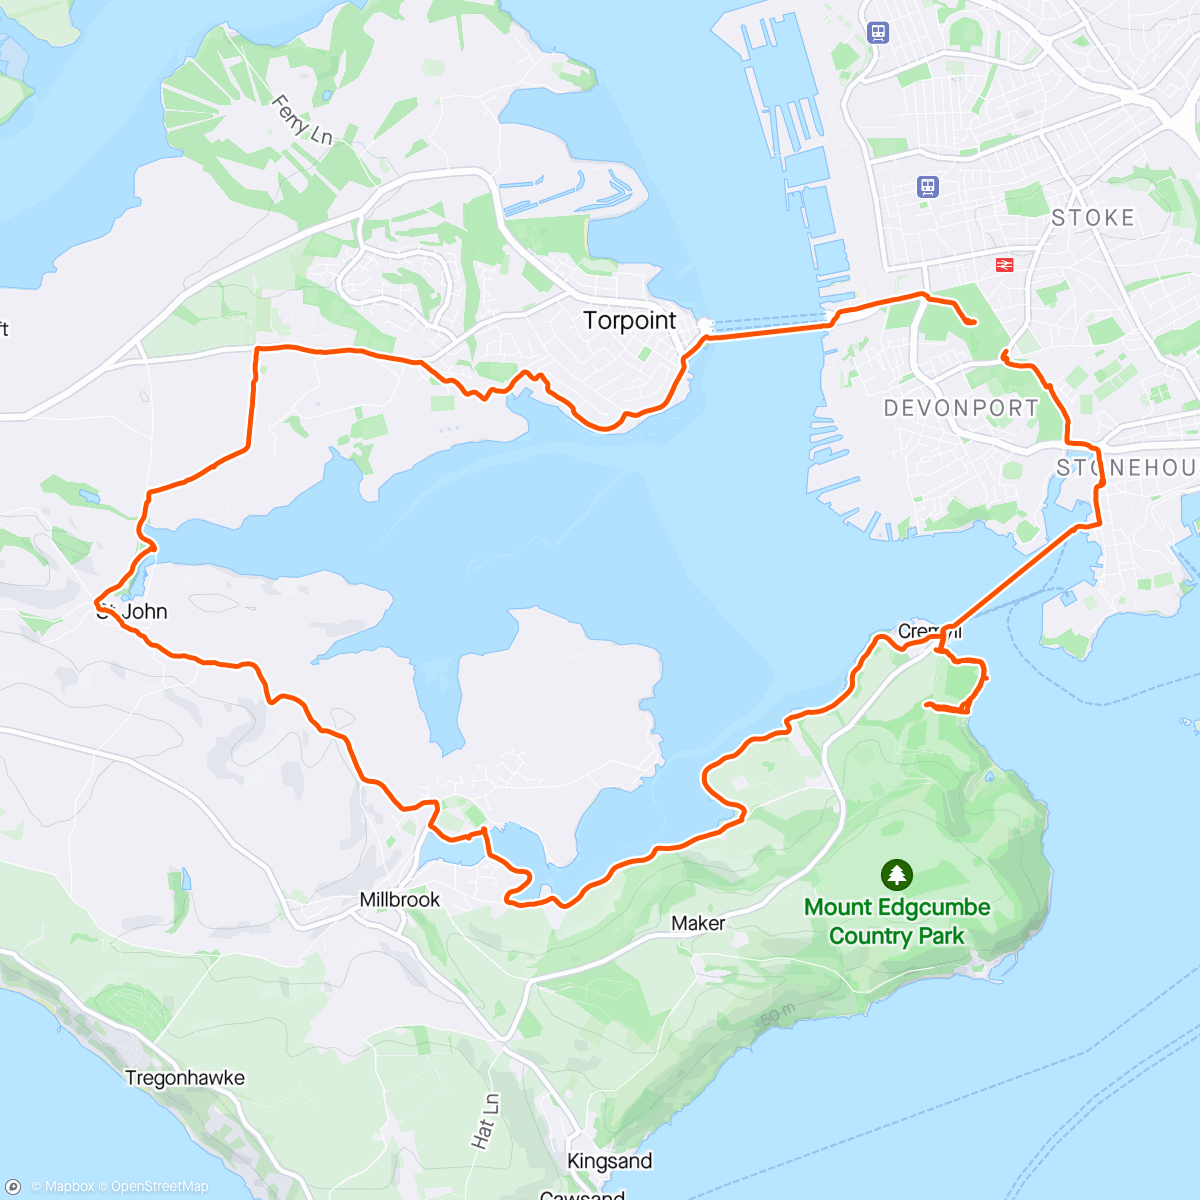 Mapa de la actividad, Tamara Way with the Ramblers from Devonport Park. Out via the Torpoint Ferry, back via the Cremyl Ferry 😊.